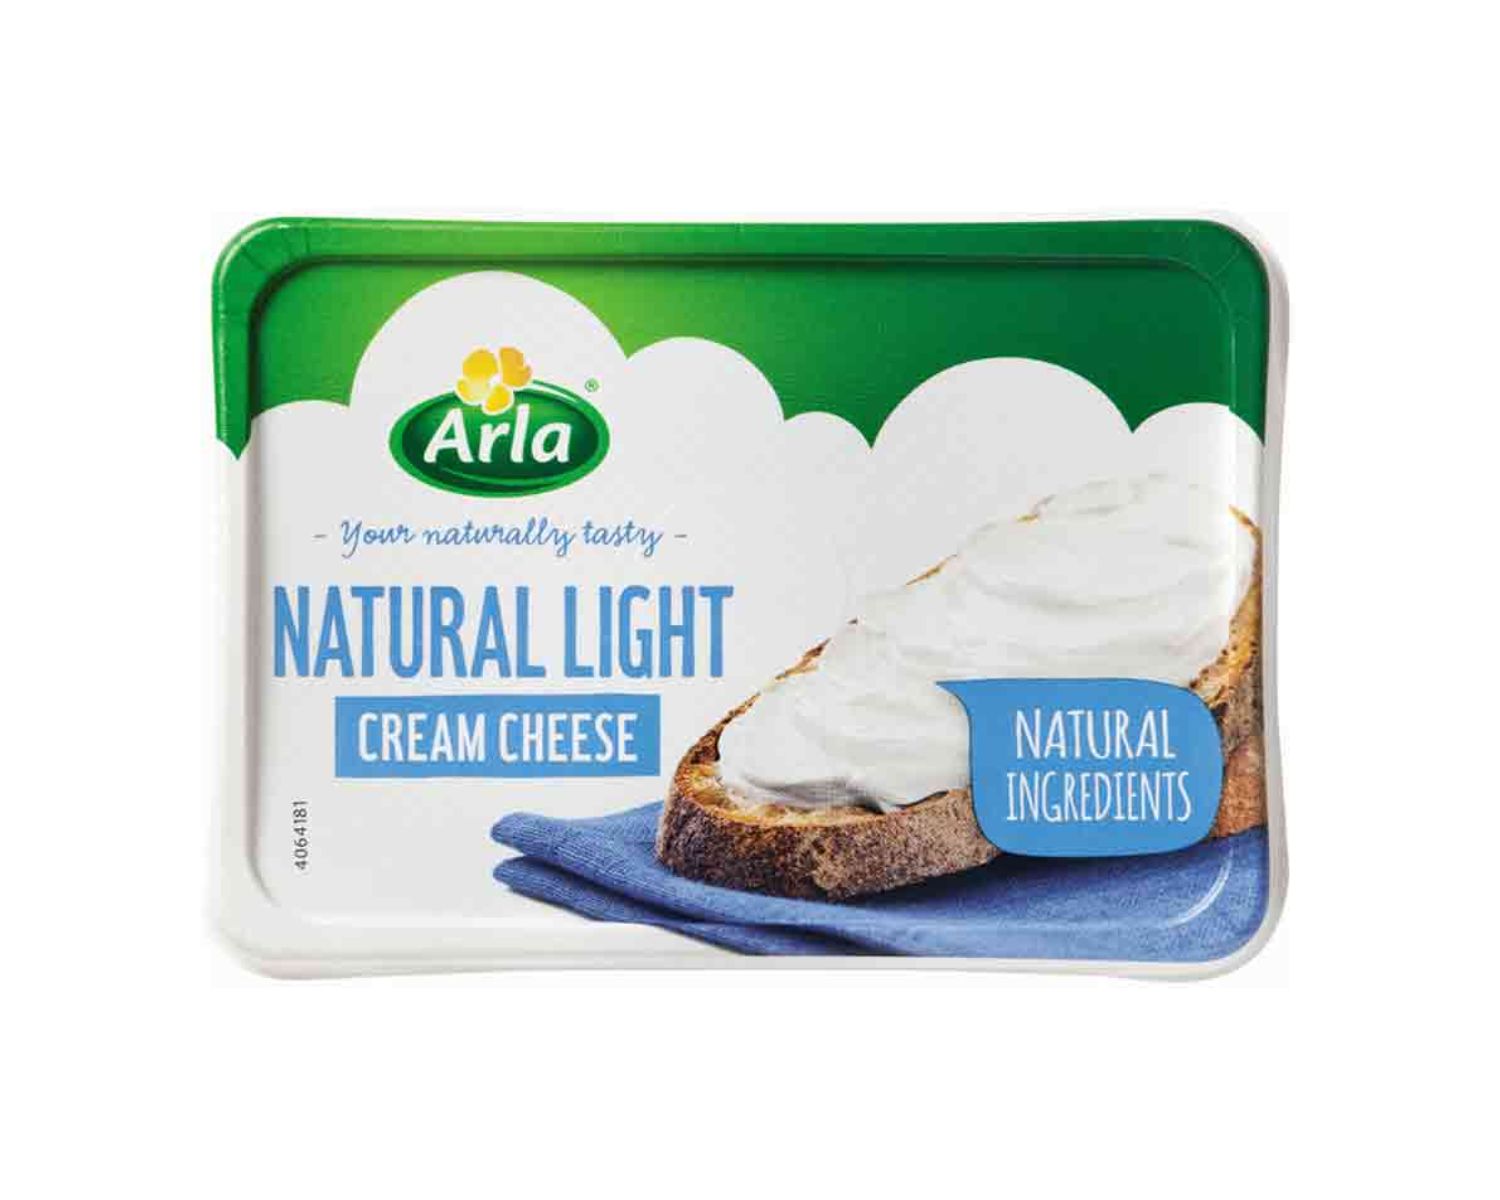 18-light-cream-cheese-nutrition-facts